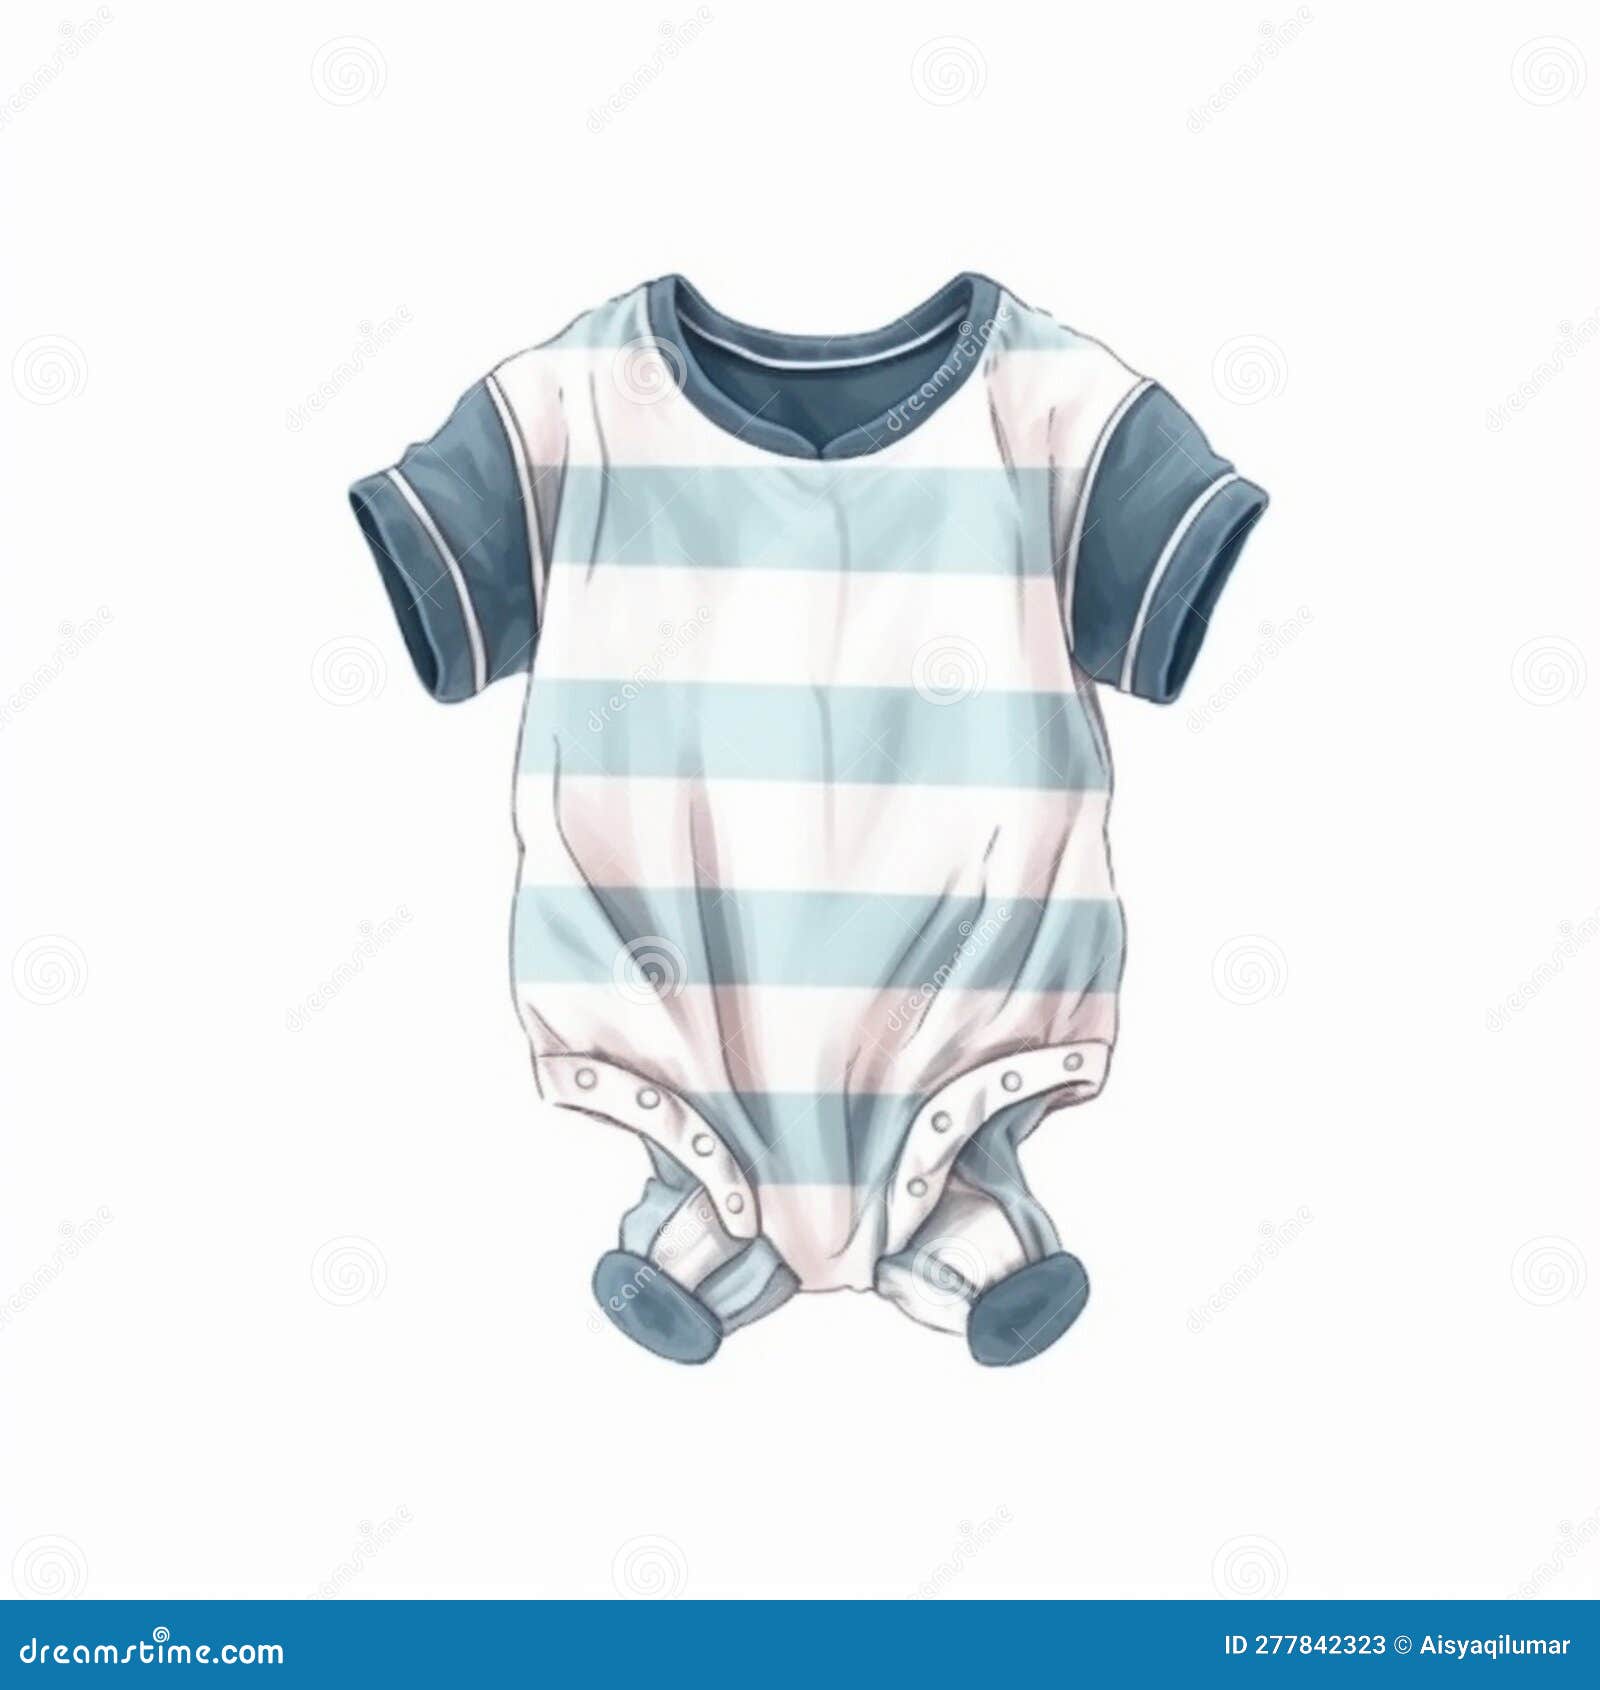 Baby Romper Drawing in Various Fashions Using Watercolor Medium. Stock ...